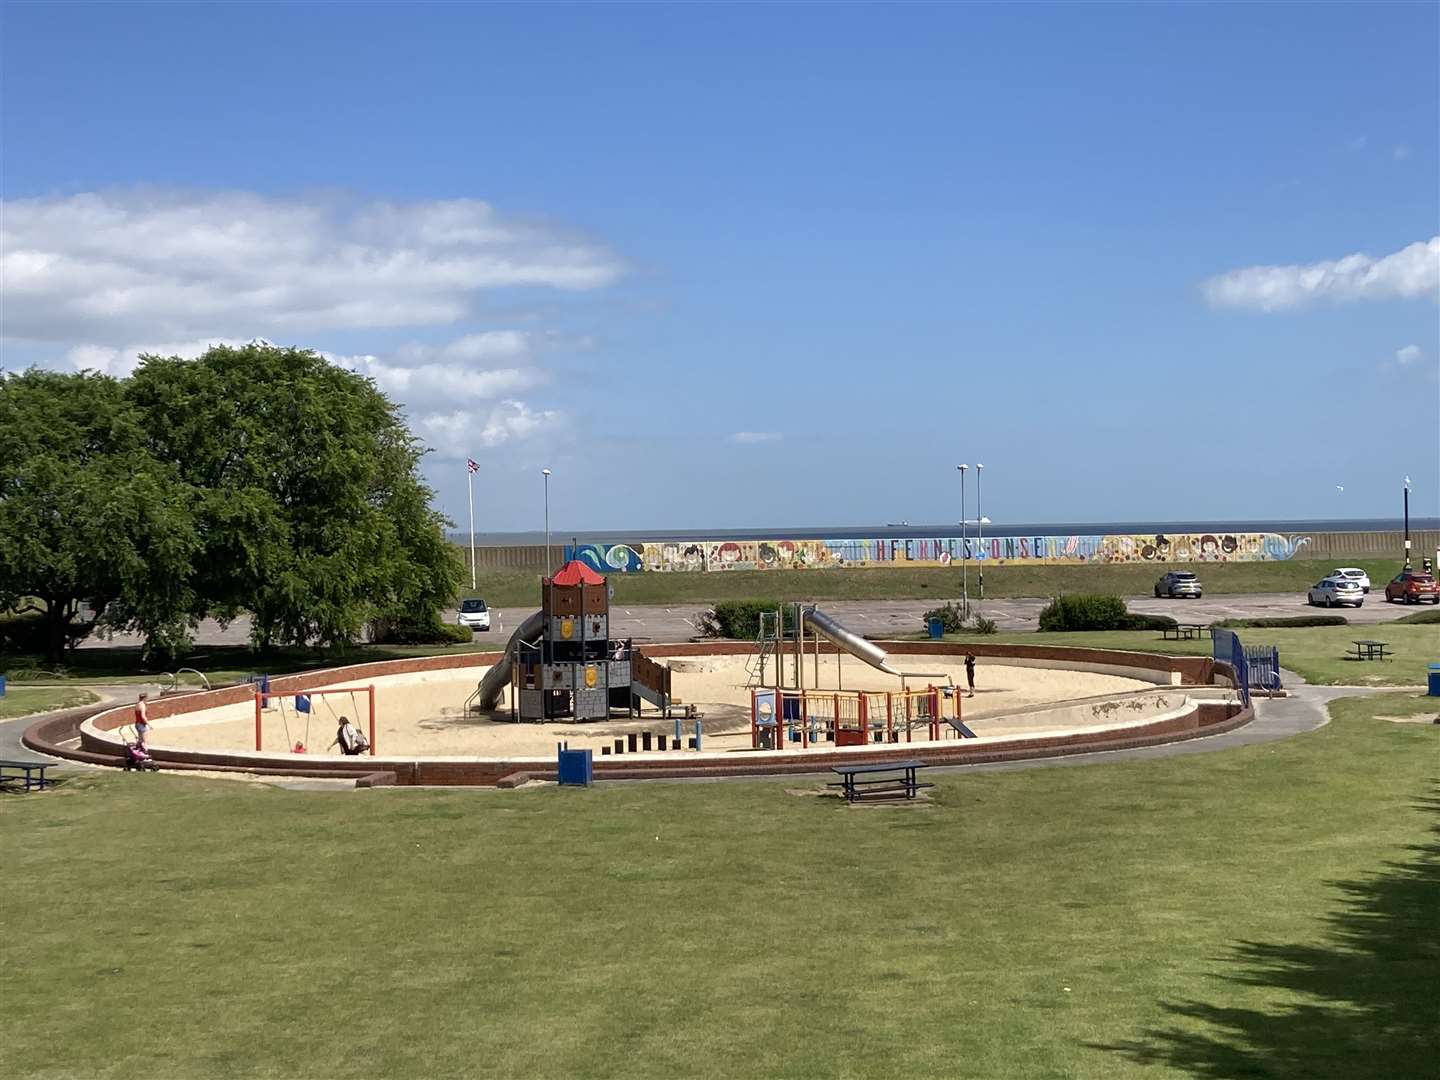 The sandpit children's play area at Beachfields on the seafront at Sheerness